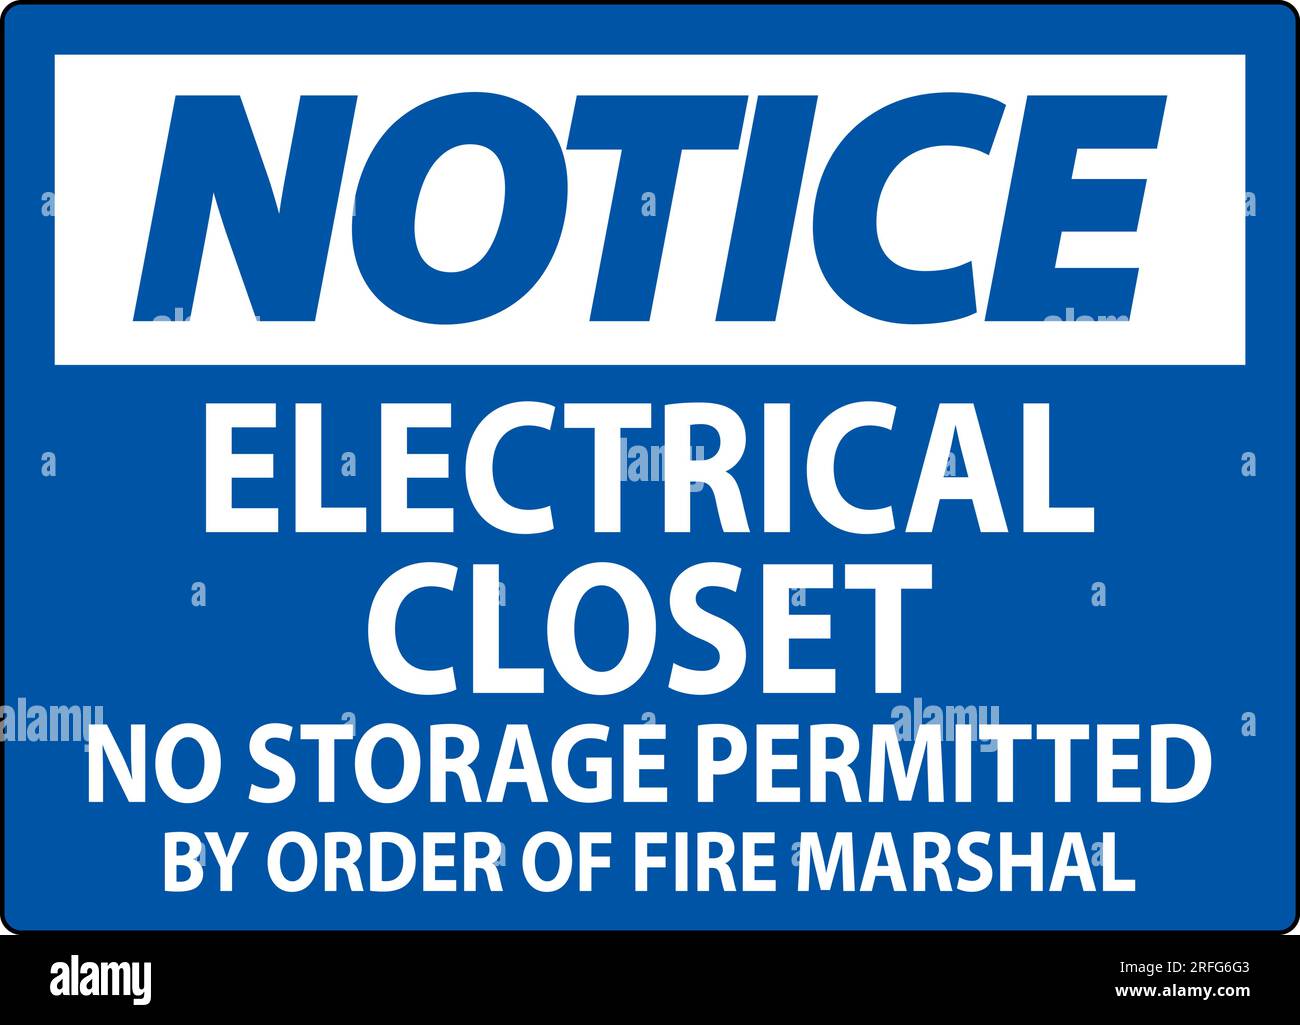 Notice Sign Electrical Closet - No Storage Permitted By Order Of Fire Marshal Stock Vector